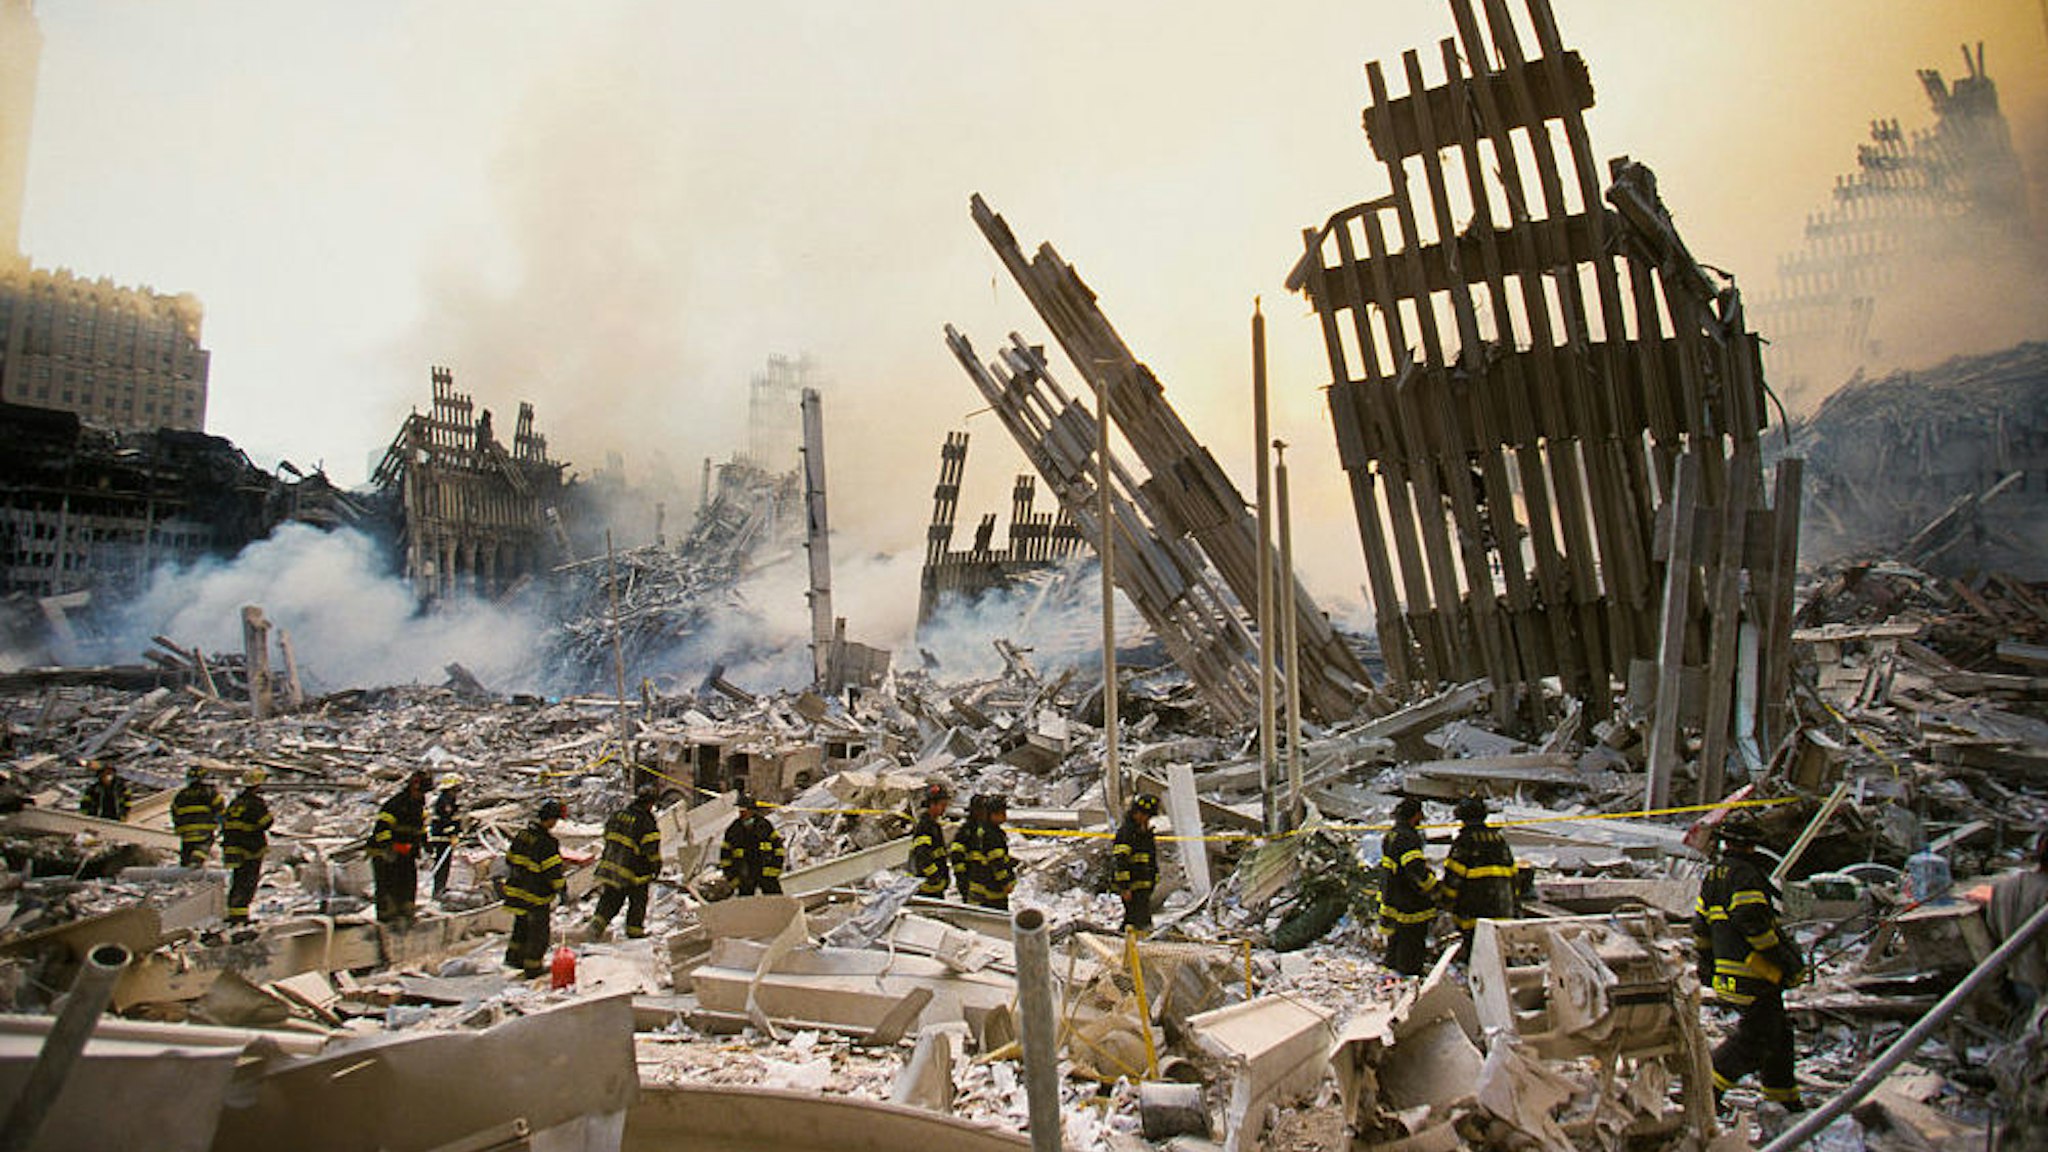 NEW YORK, NY - SEPTEMBER 12, 2001: The rubble of the World Trade Center smoulders following a terrorist attack 11 September 2001 in New York. A hijacked plane crashed into and destroyed the landmark structure.